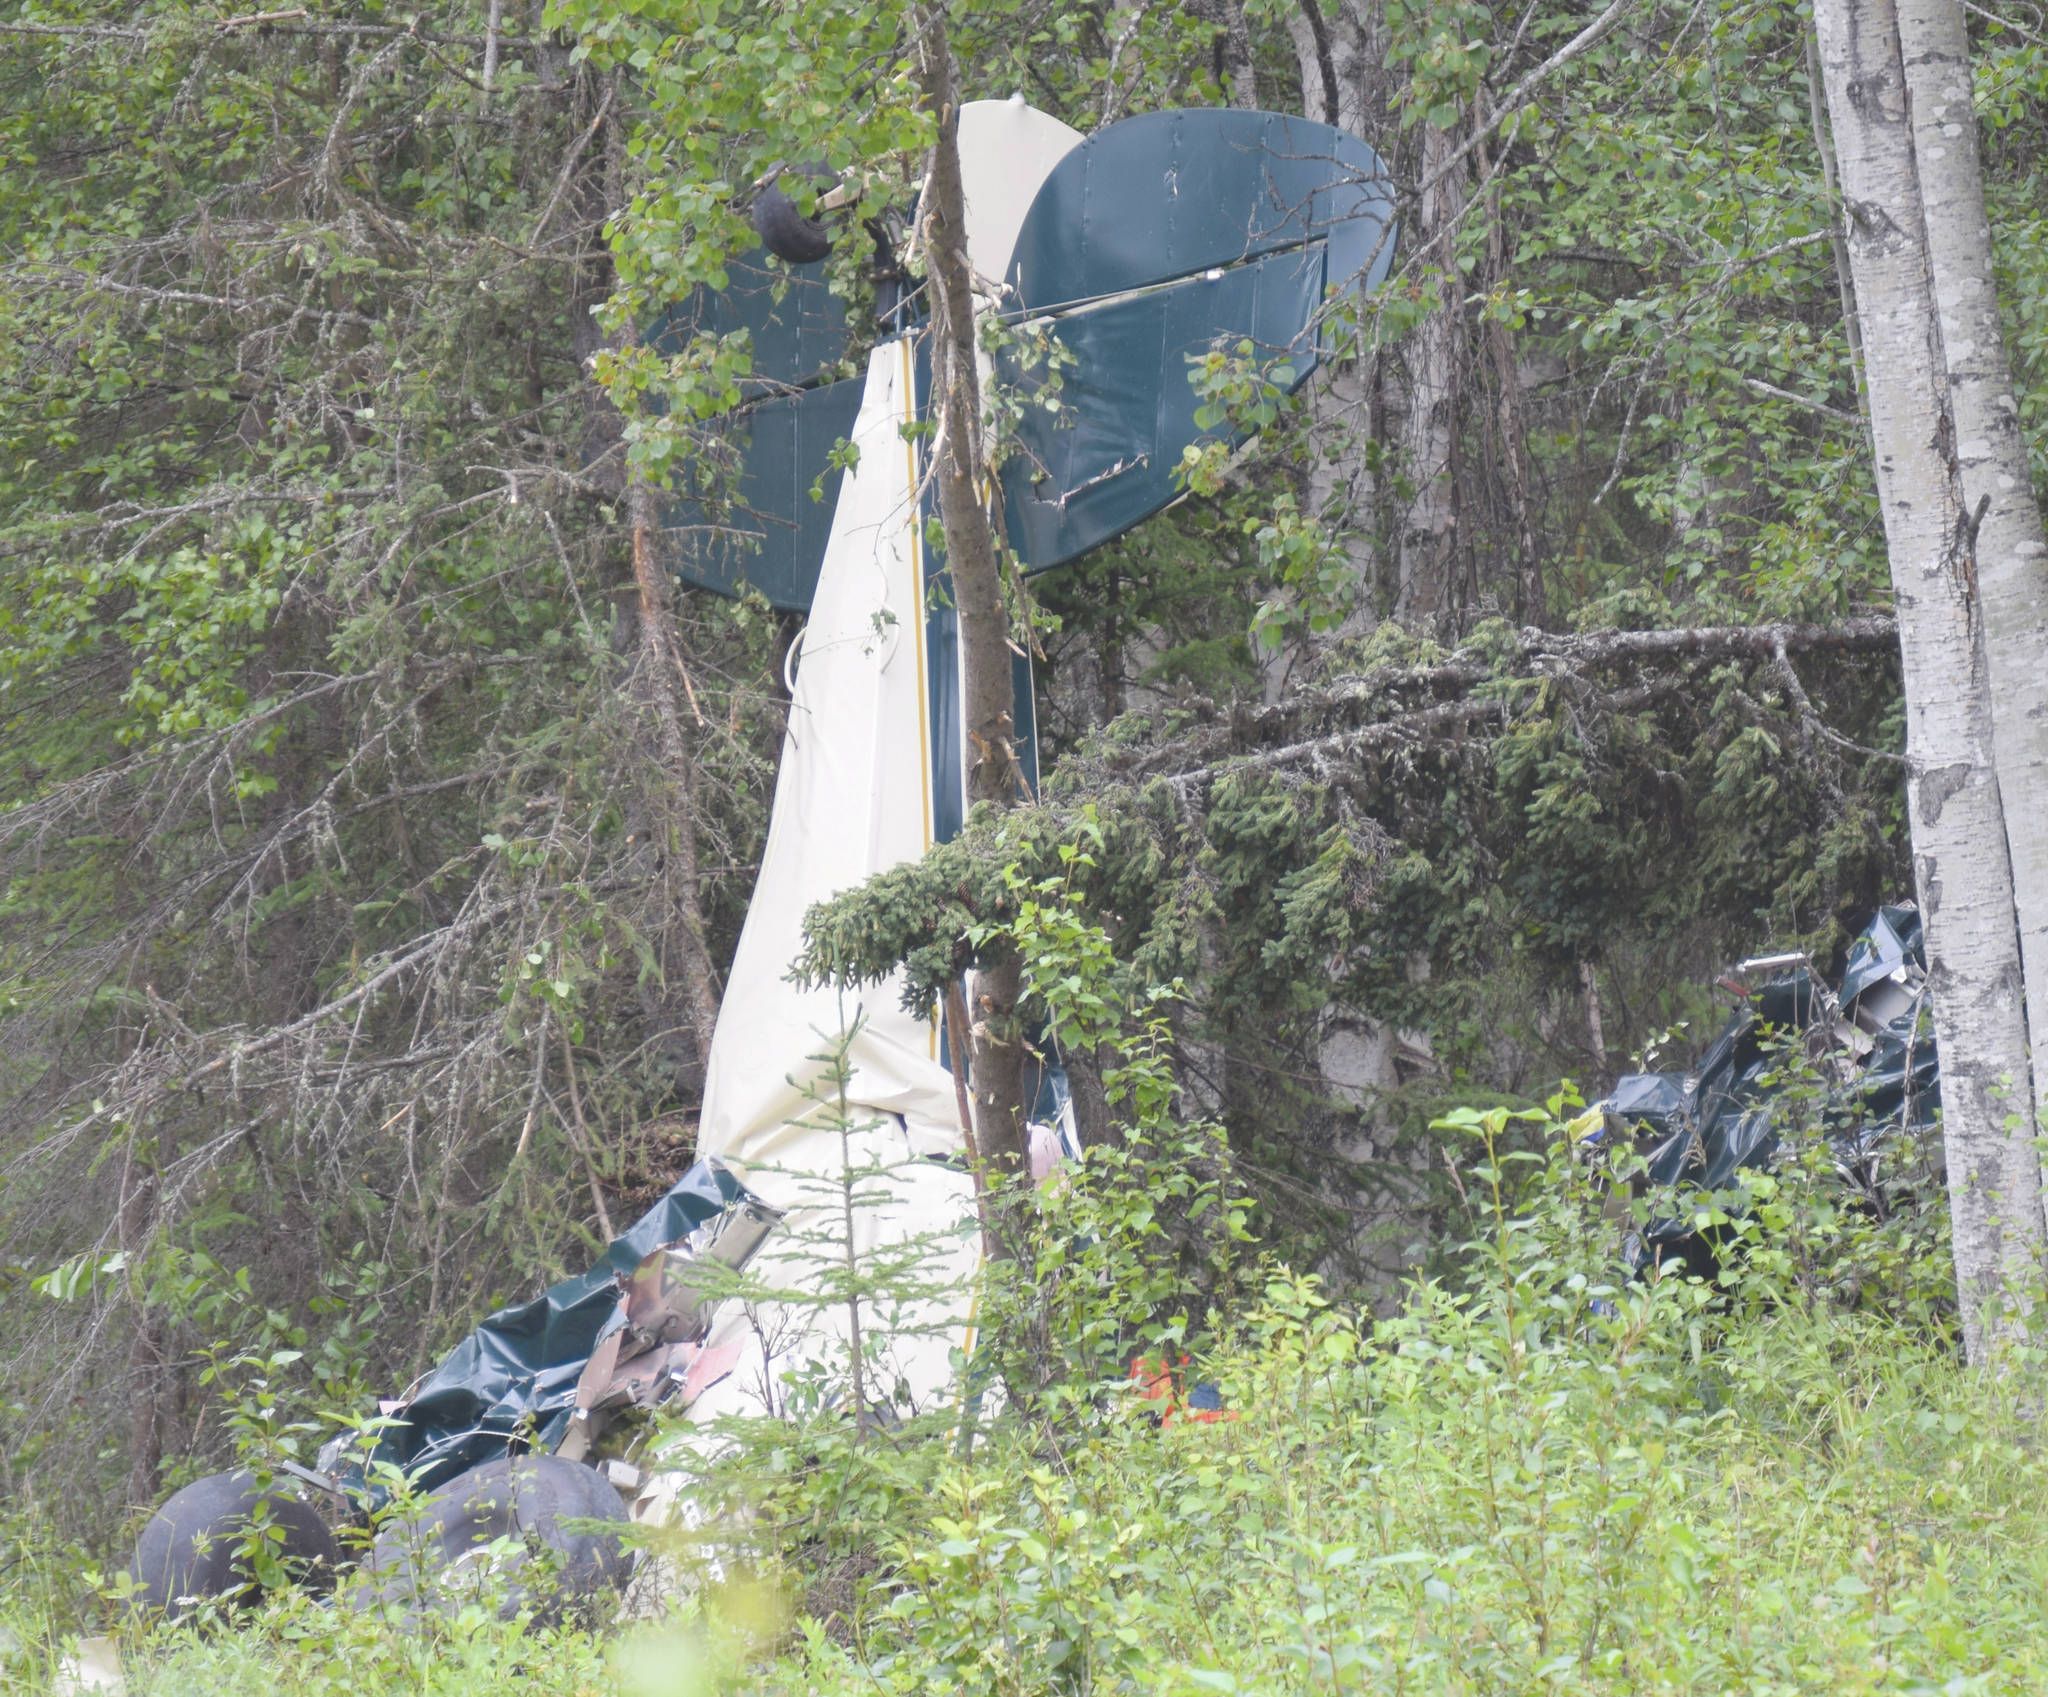 One of the planes involved in the midair collision that killed seven people, including Rep. Gary Knopp, rests in the woods just off Mayoni Street just outside of Soldotna, Alaska, on Friday, July 31, 2020. (Photo by Jeff Helminiak/Peninsula Clarion)